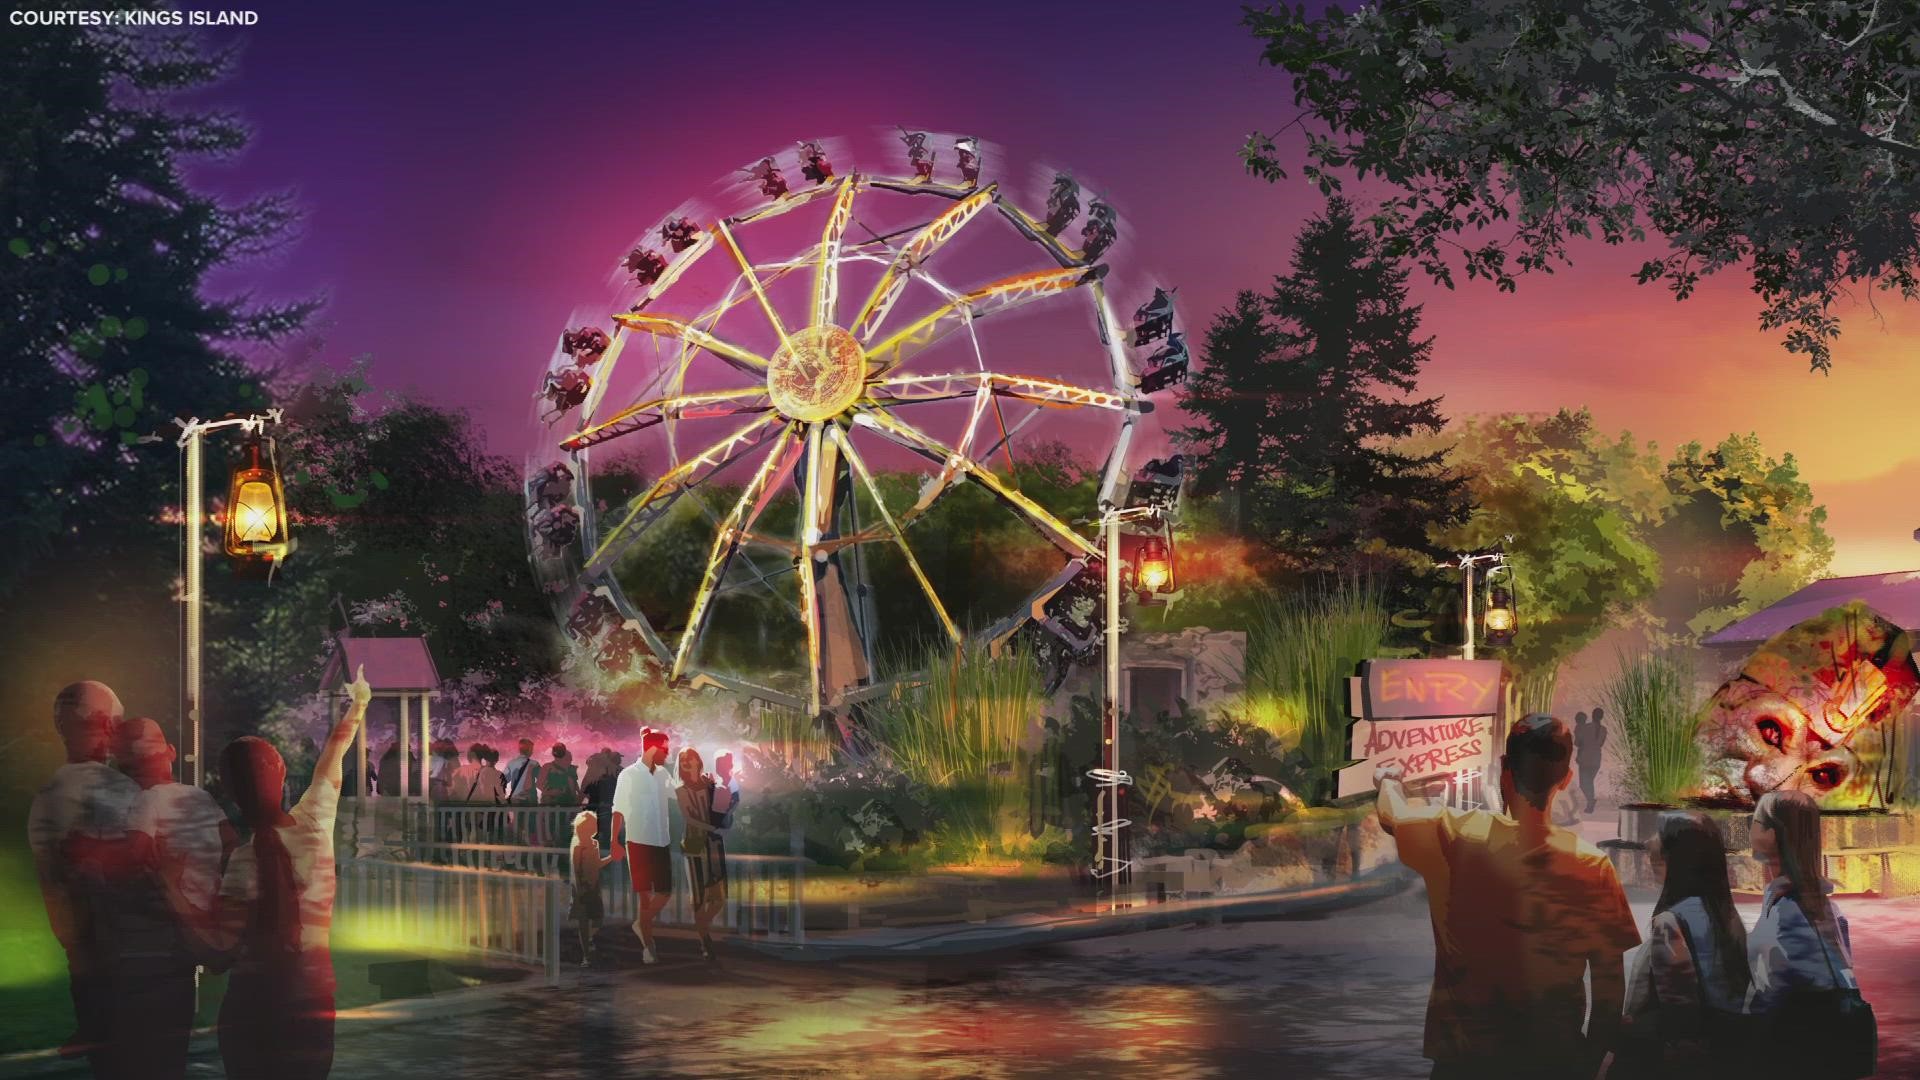 The newly themed area known as Adventure Port, which is set to debut in 2023, will also include enhancements to the park's existing Adventure Express roller coaster.